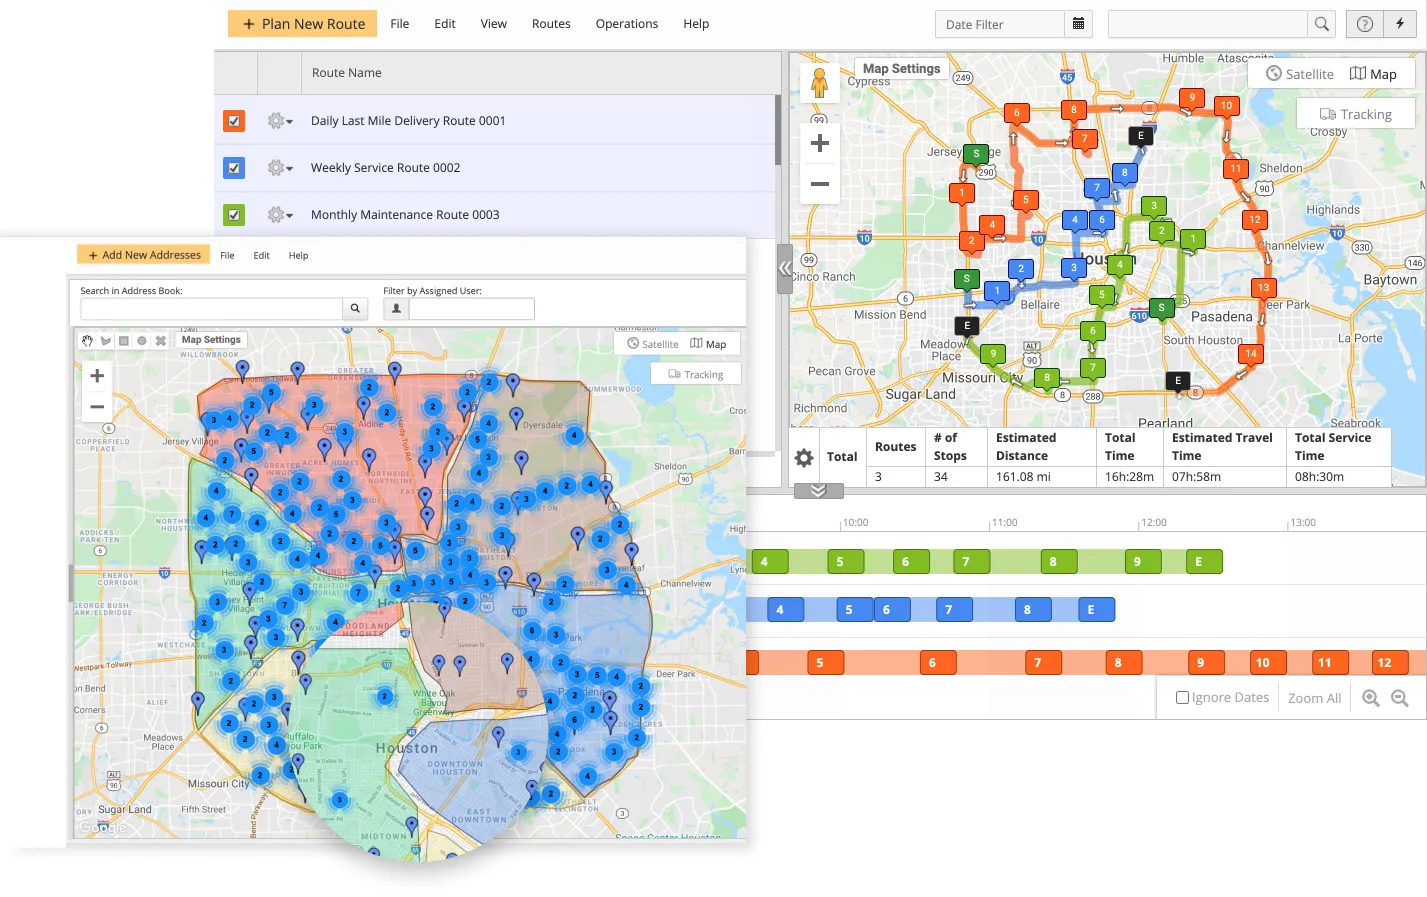 Optour's map route planner allows you to map, search, and categorize customers